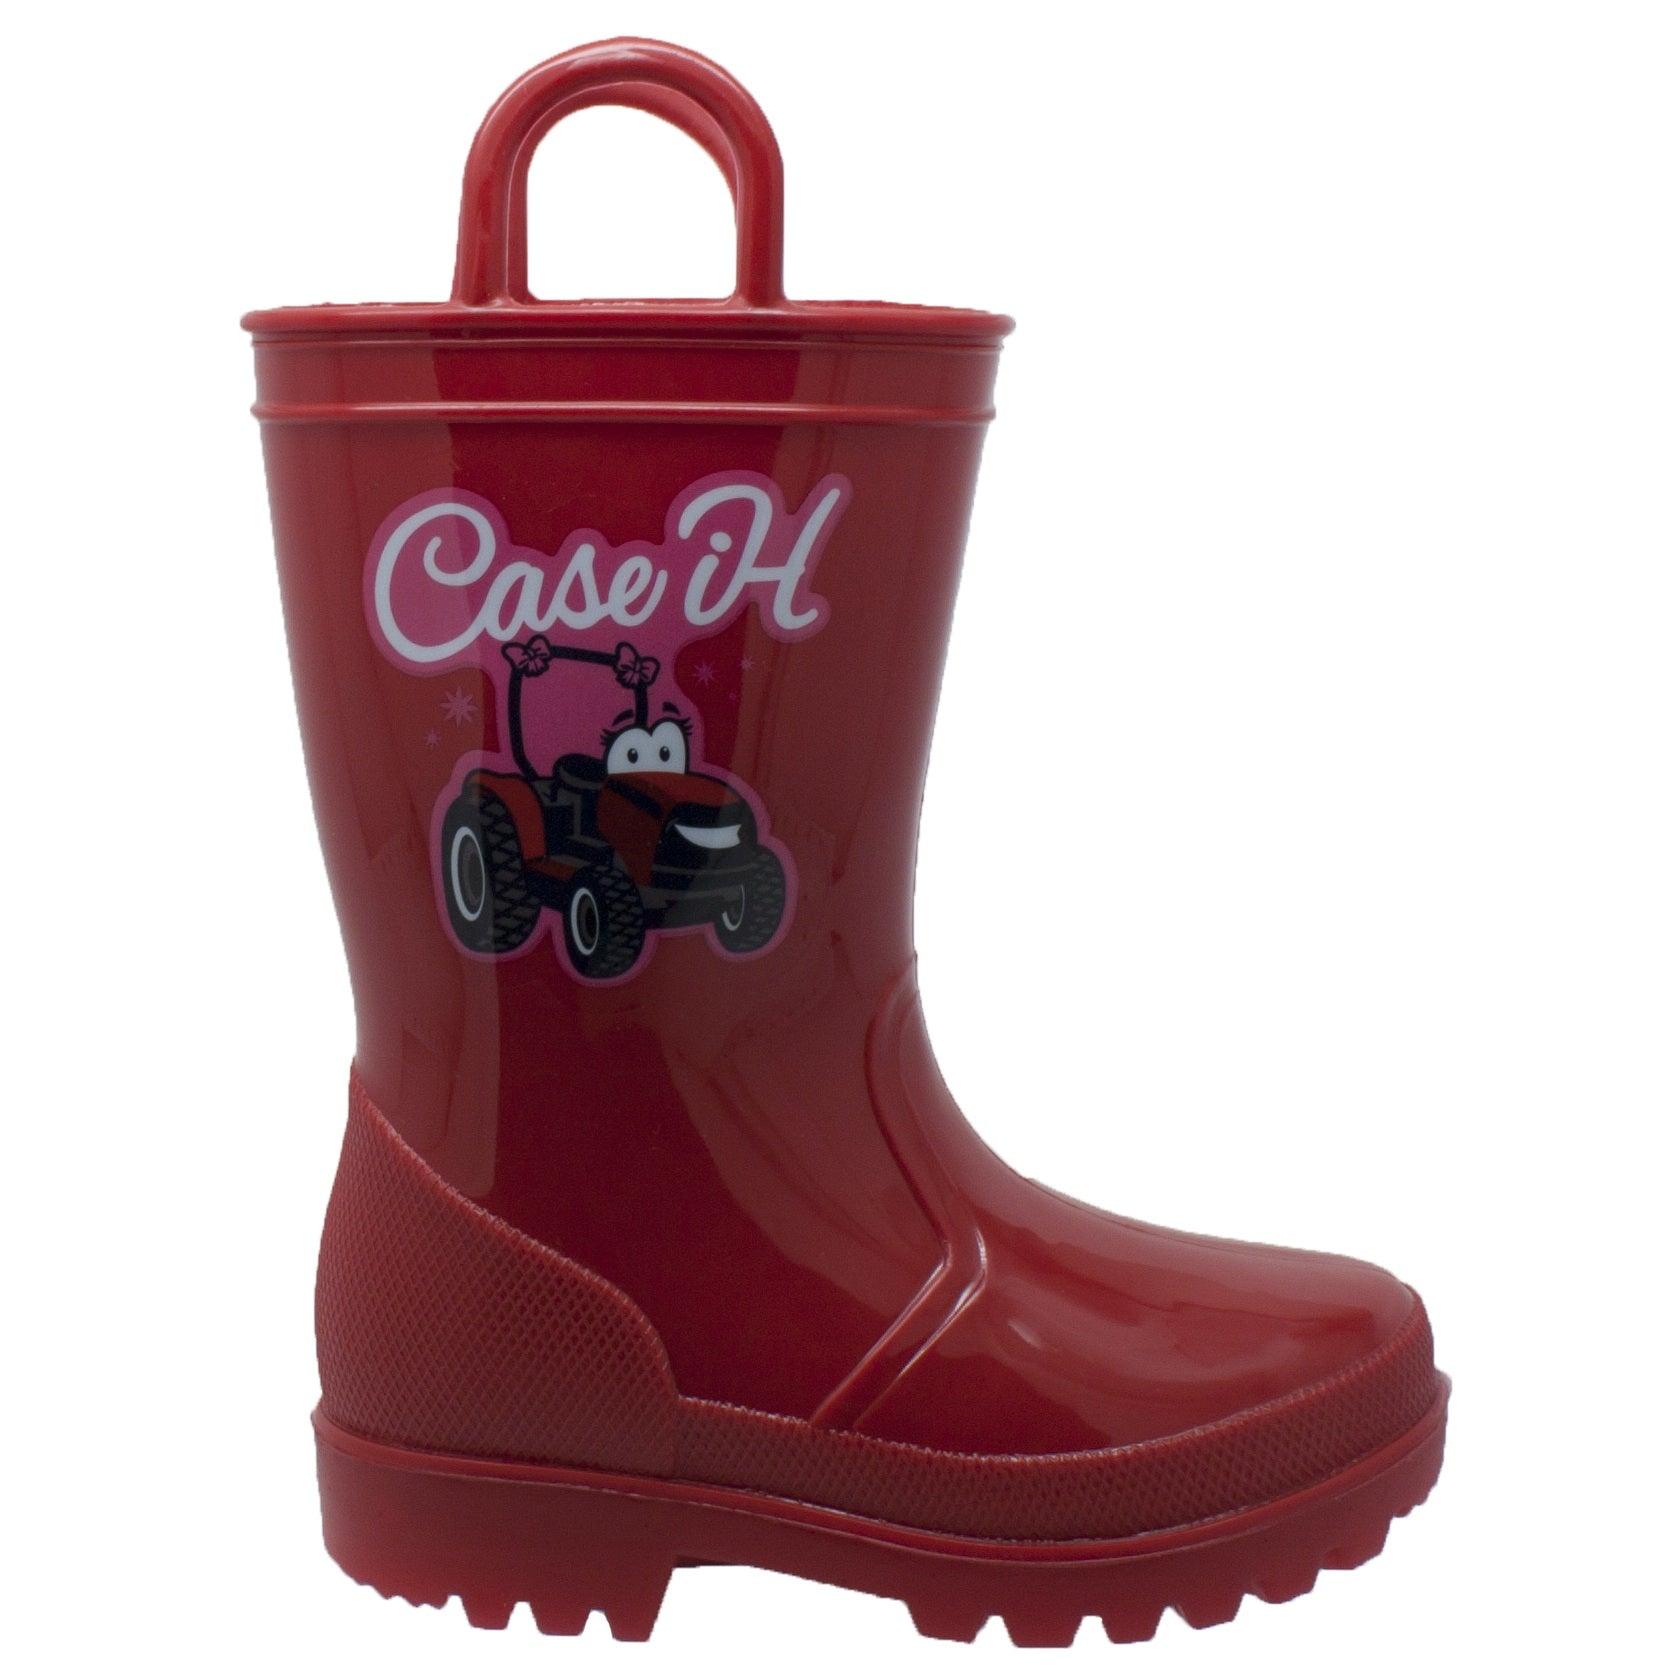 Case IH Toddler's PVC Boot with Light-Up Outsole Red - Flyclothing LLC